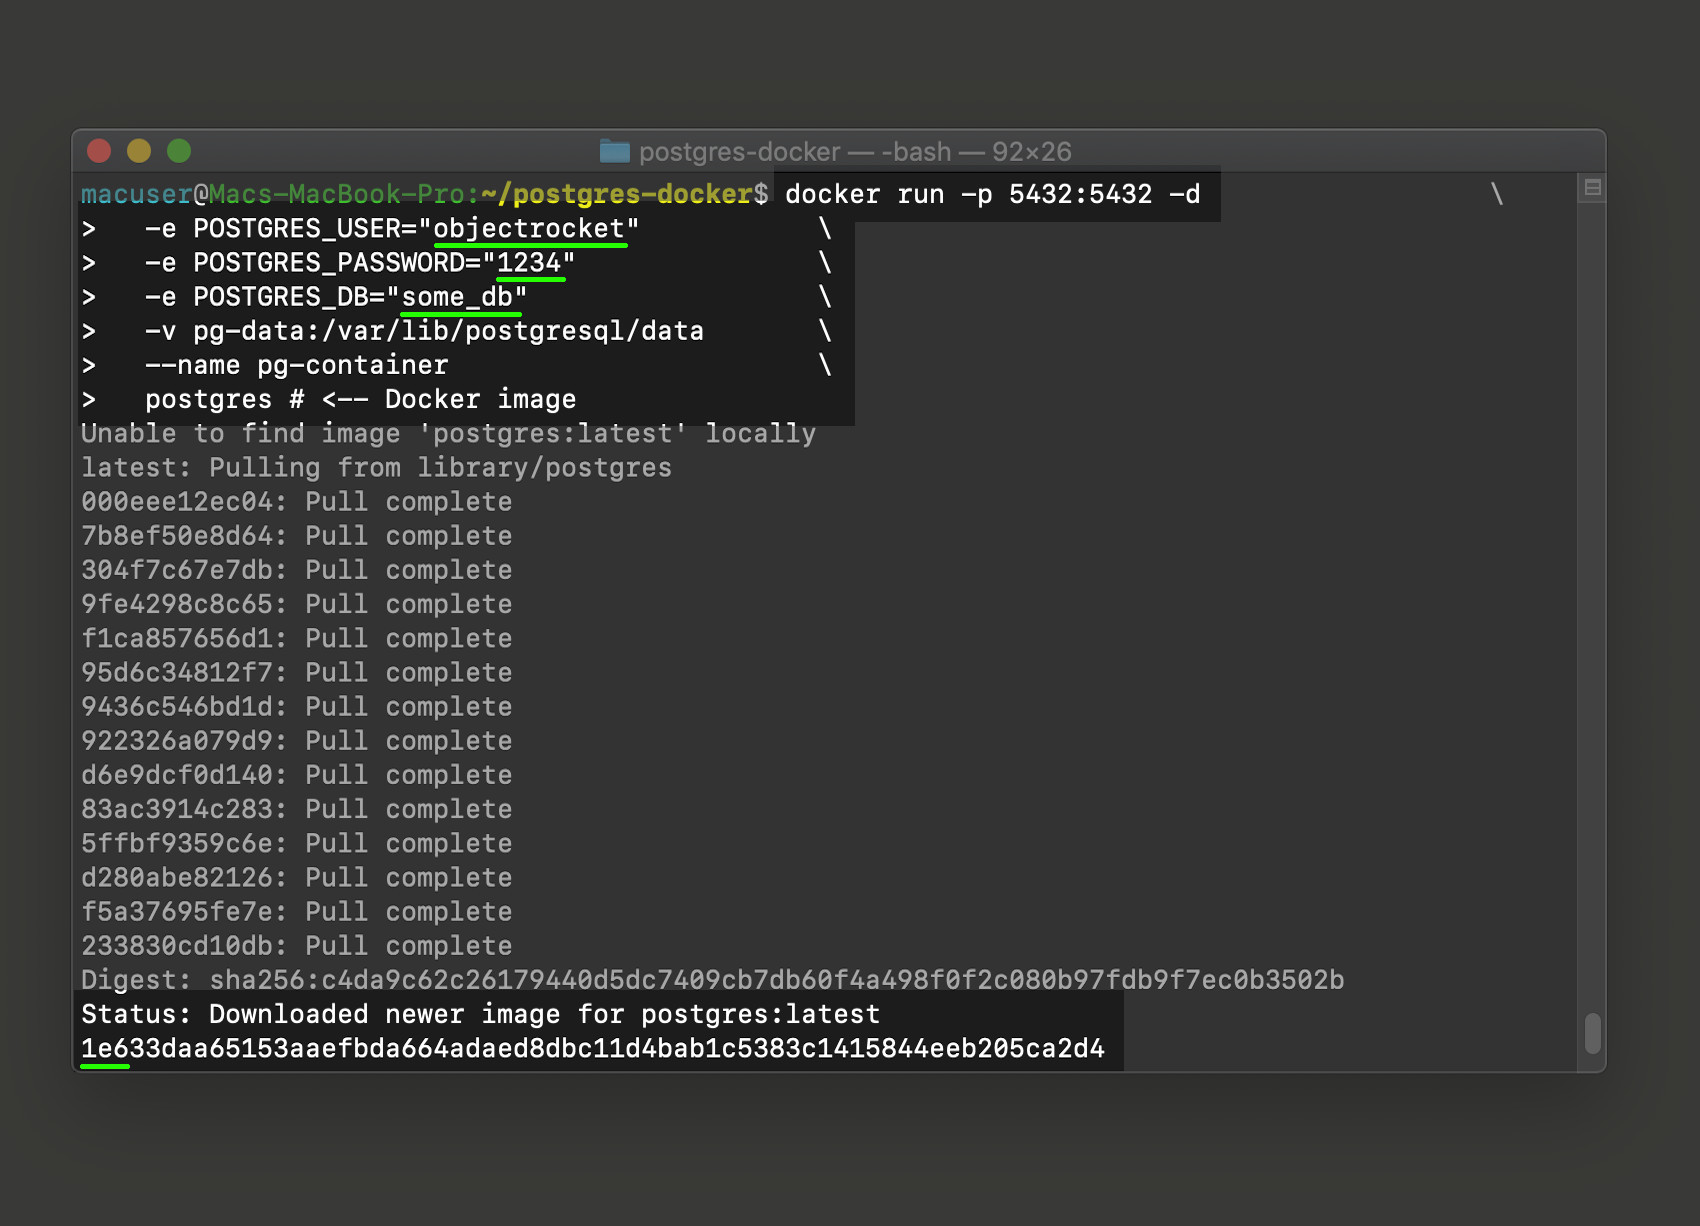 docker run command in a UNIX terminal to pull and start Postgres container from image